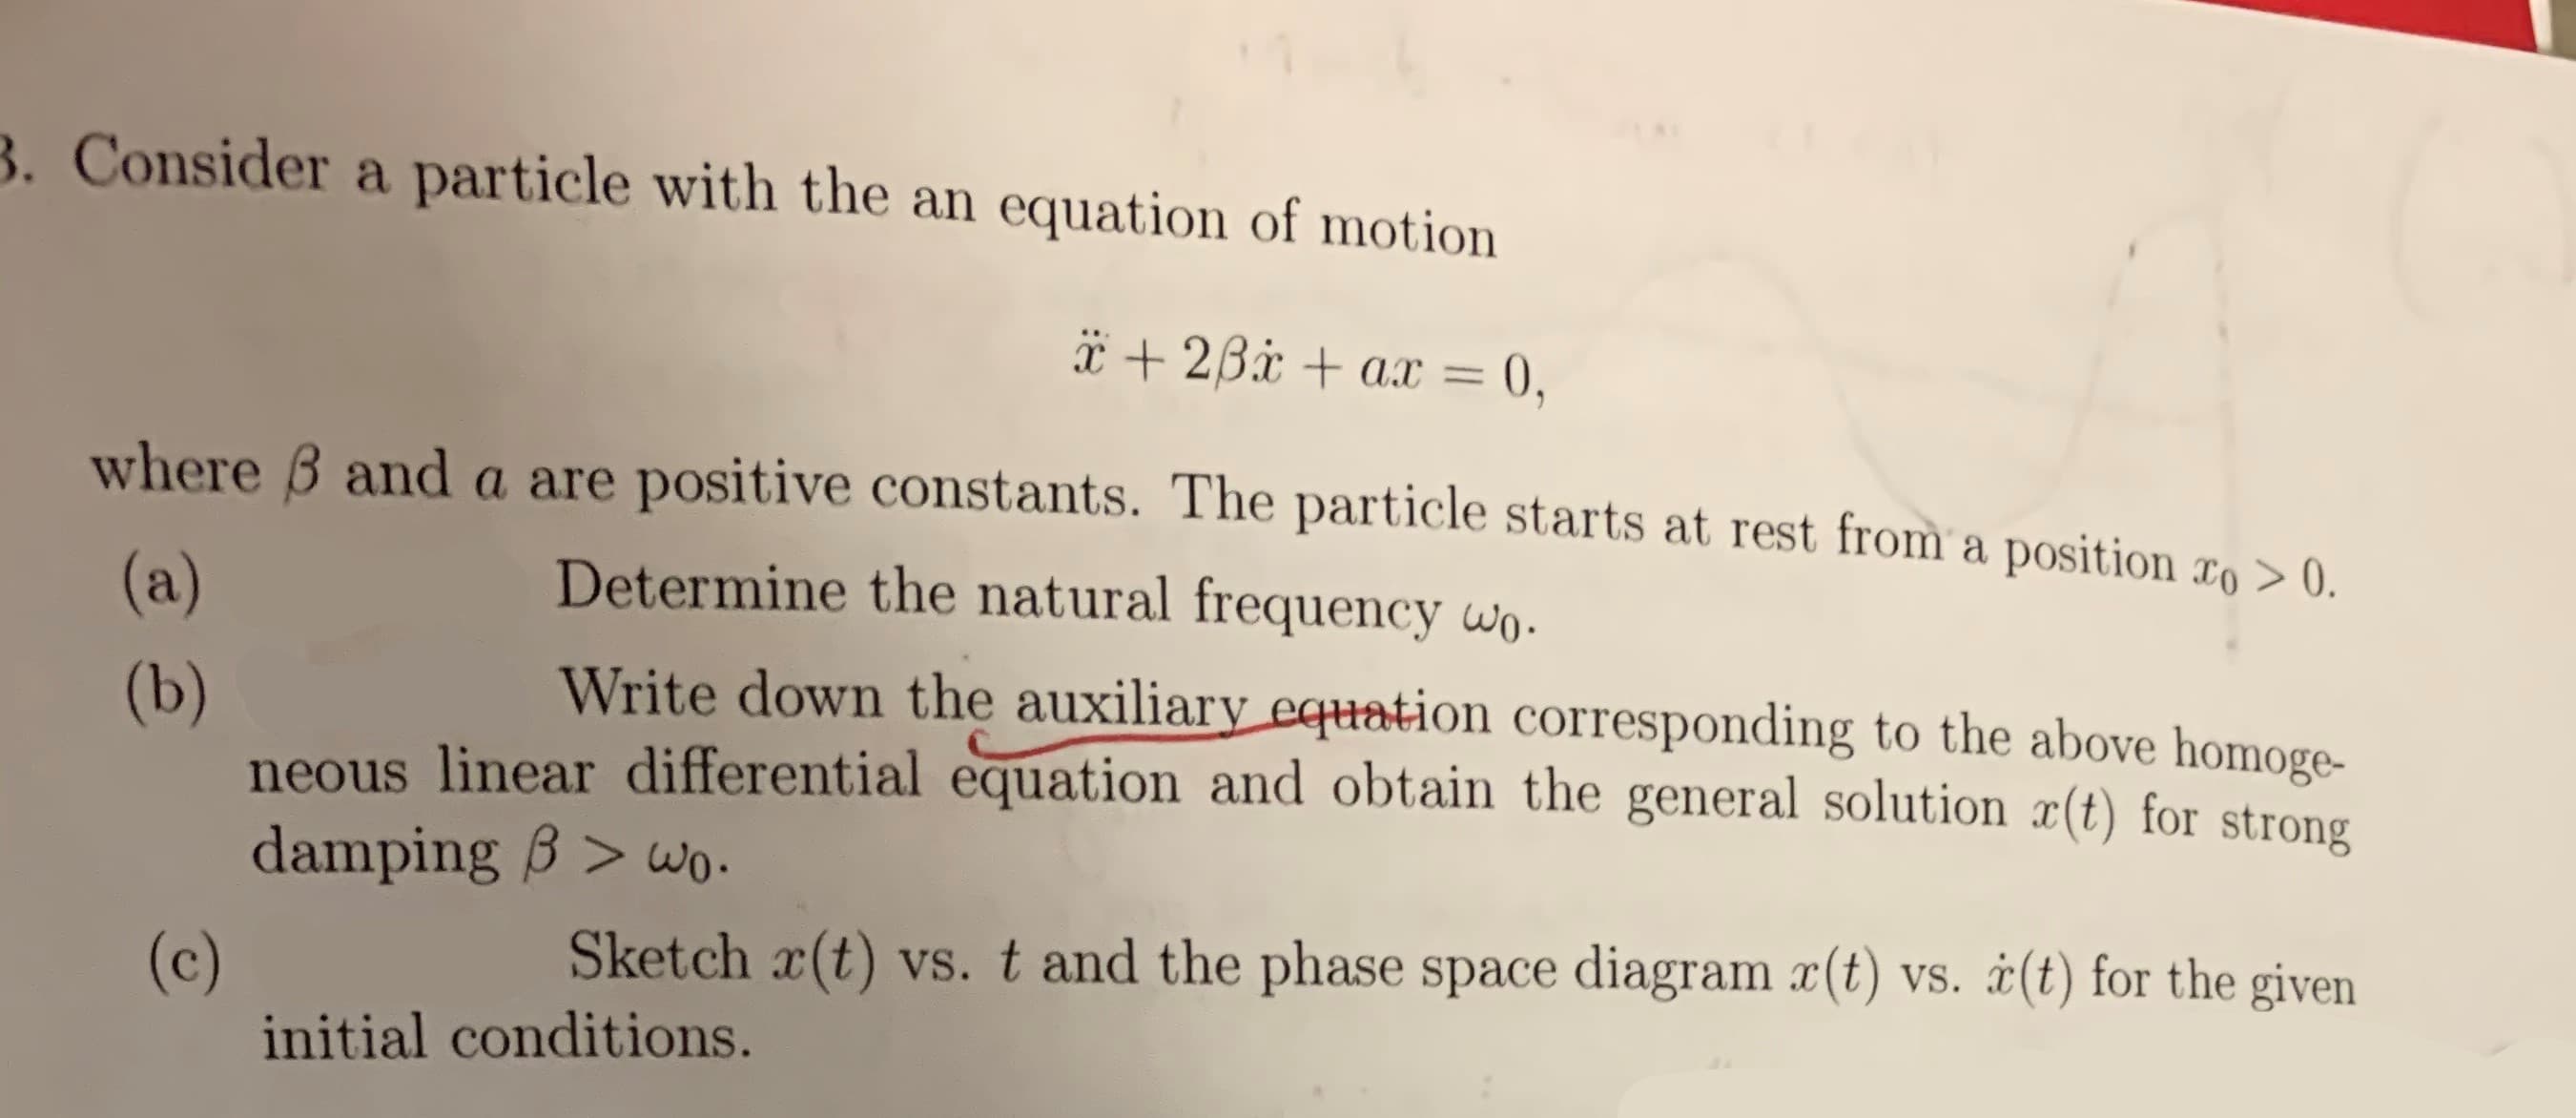 . Consider a particle with the an equation of motion
I 26.xax =
0,
where B anda are positive constants. The particle starts at rest from a position >0
Determine the natural frequency wo.
(a)
Write down the auxiliary equation corresponding to the above homoge-
(b)
neous linear differential equation and obtain the general solution æ(t) for strong
damping B >wo.
Sketch x(t) vs. t and the phase space diagram x(t) vs. (t) for the given
(c)
initial conditions.
